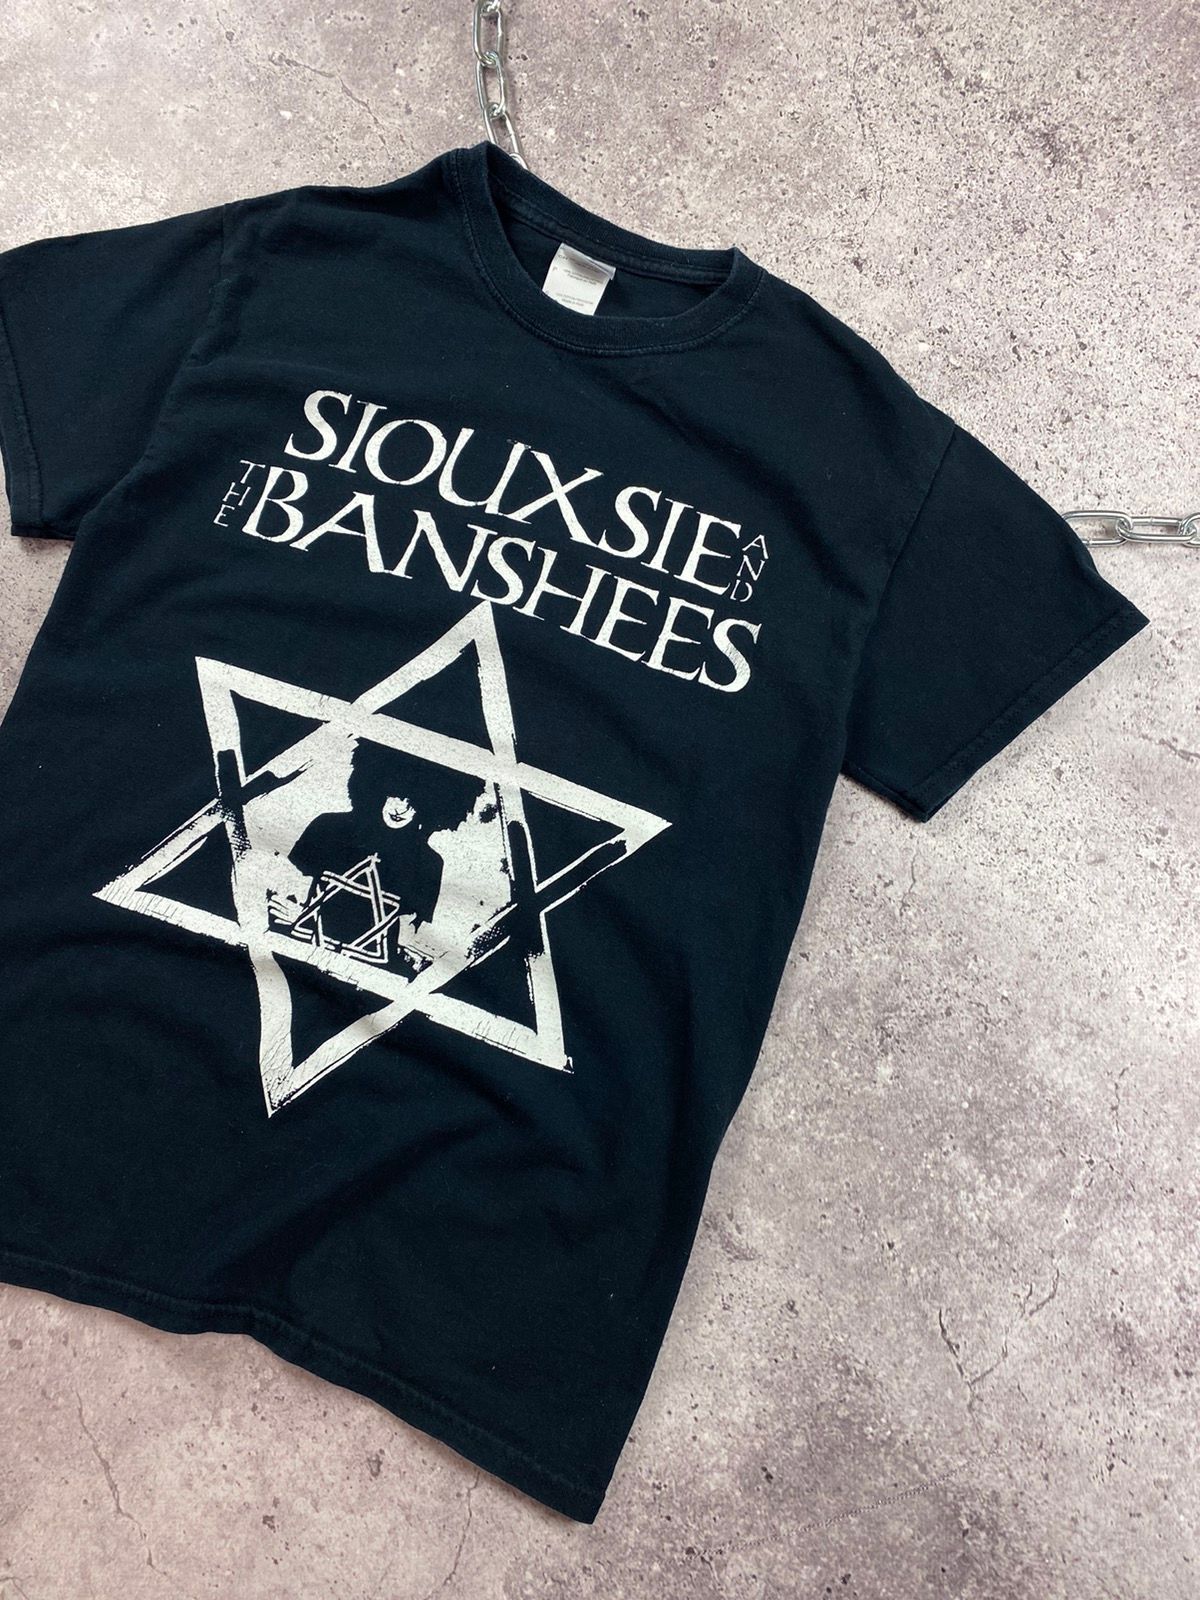 Vintage Vintage Siouxsie And The Banshees Tee Shirt Punk Faded Size US S / EU 44-46 / 1 - 2 Preview